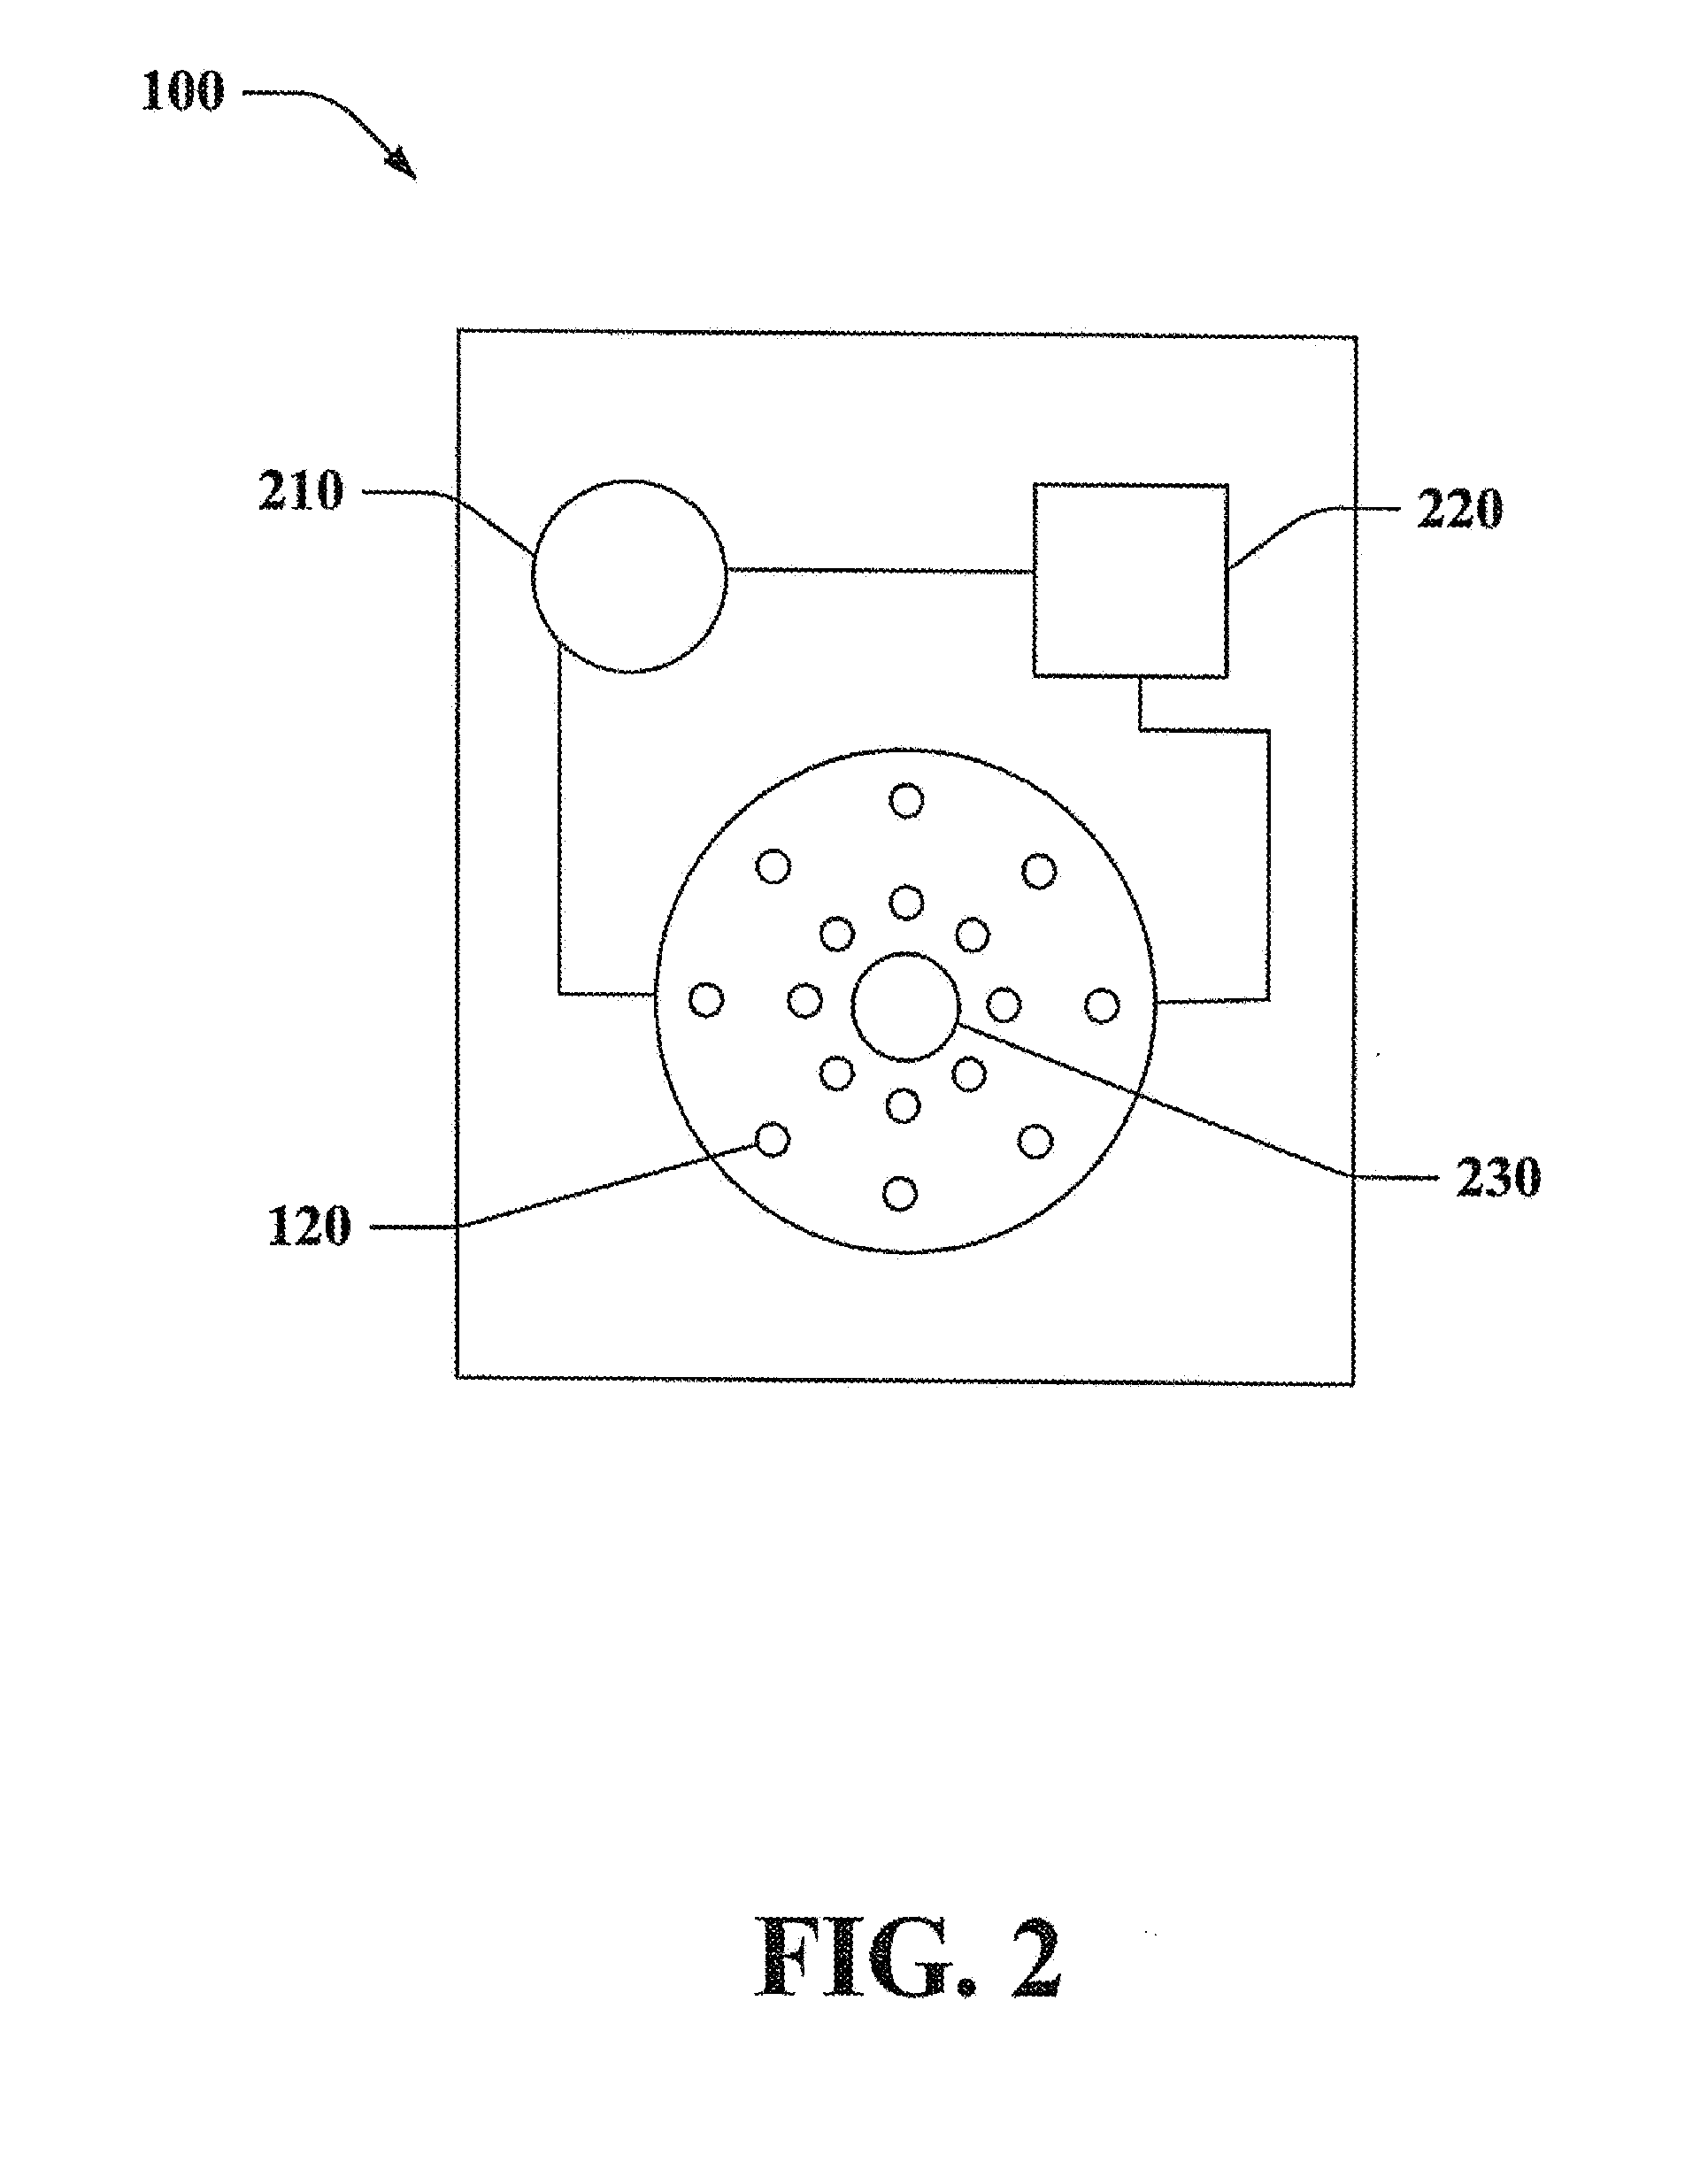 Lighting Wall Switch with Power Failure Capability